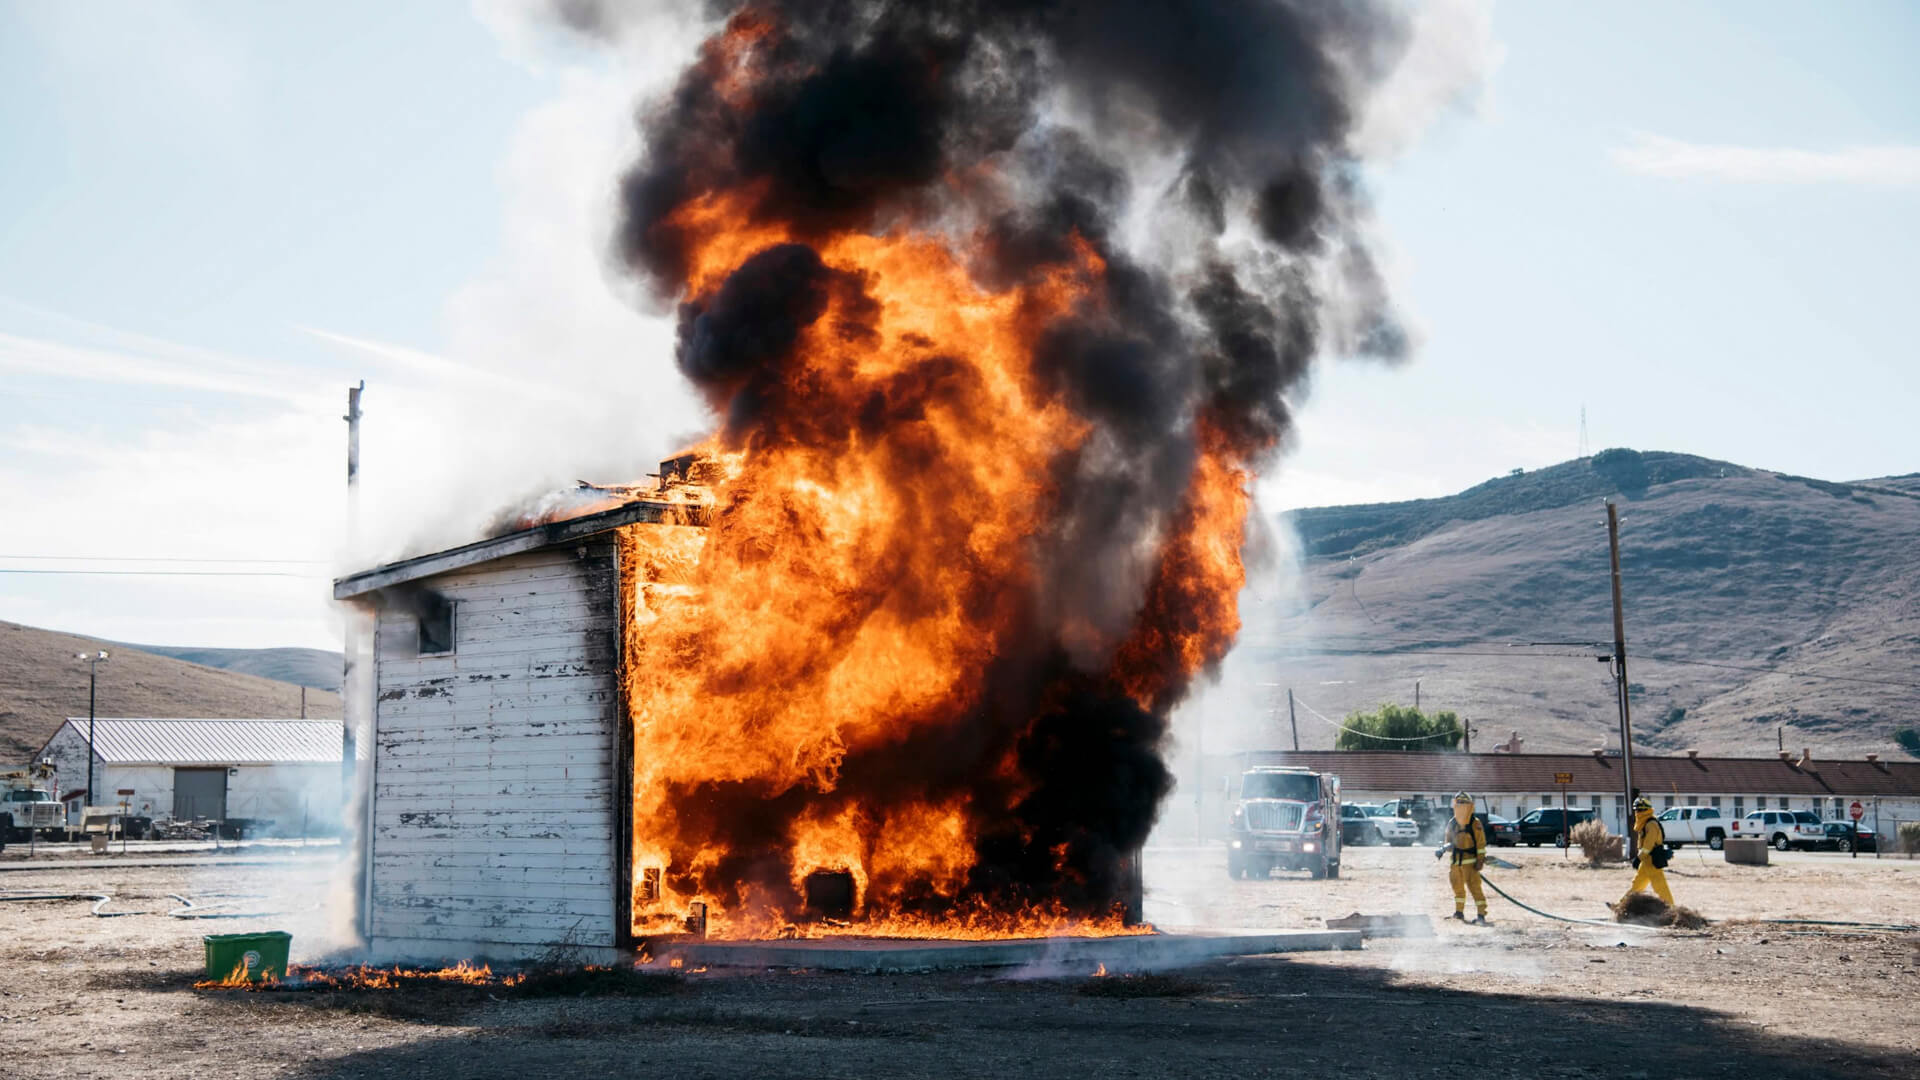 Fire demonstration at Camp San Luis